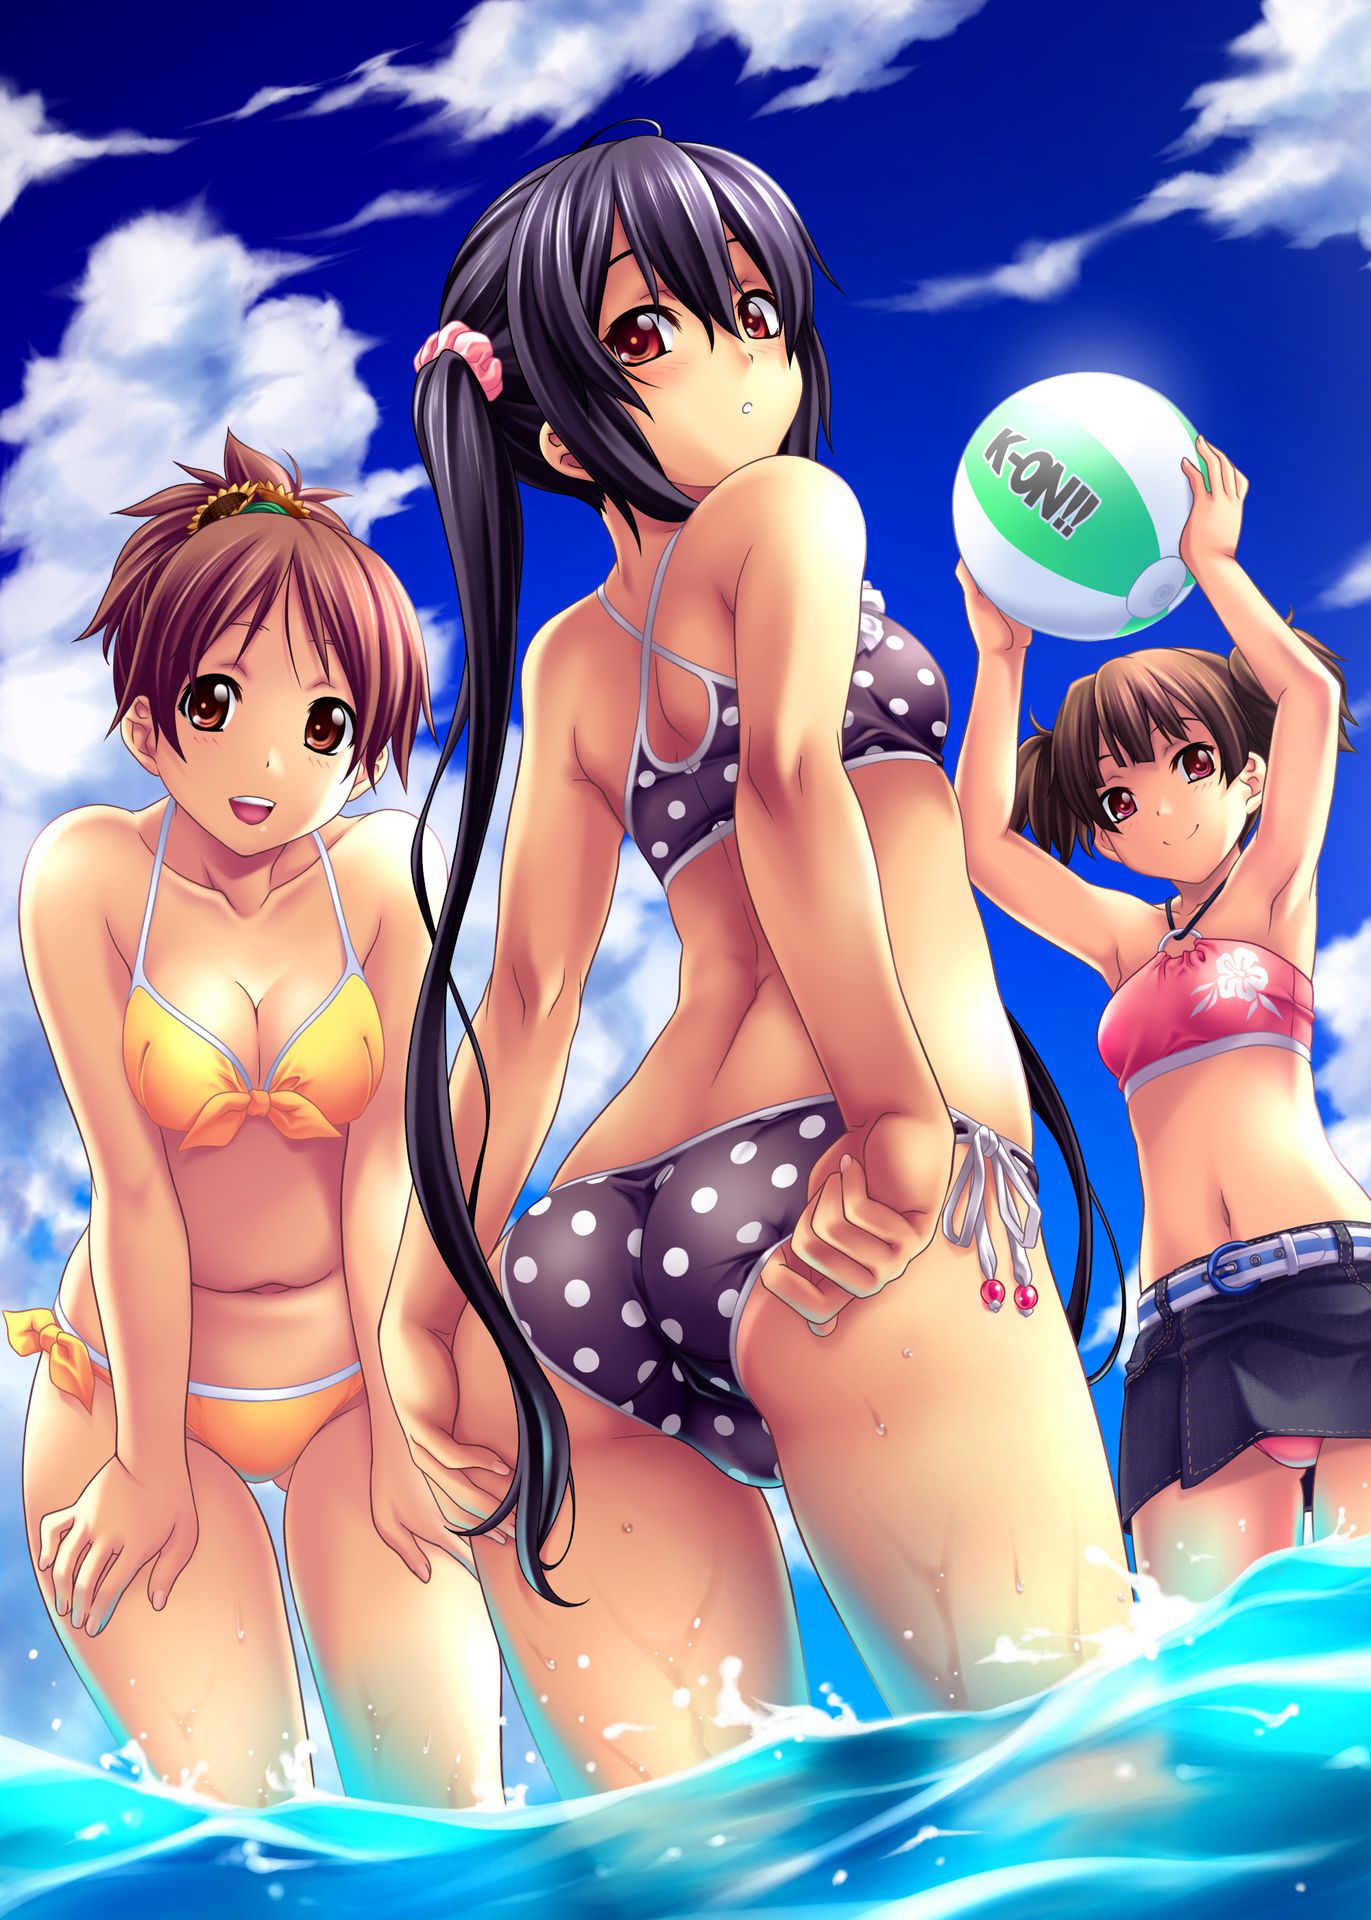 K-on! Large set of characters! In the (nude) part 4. 5